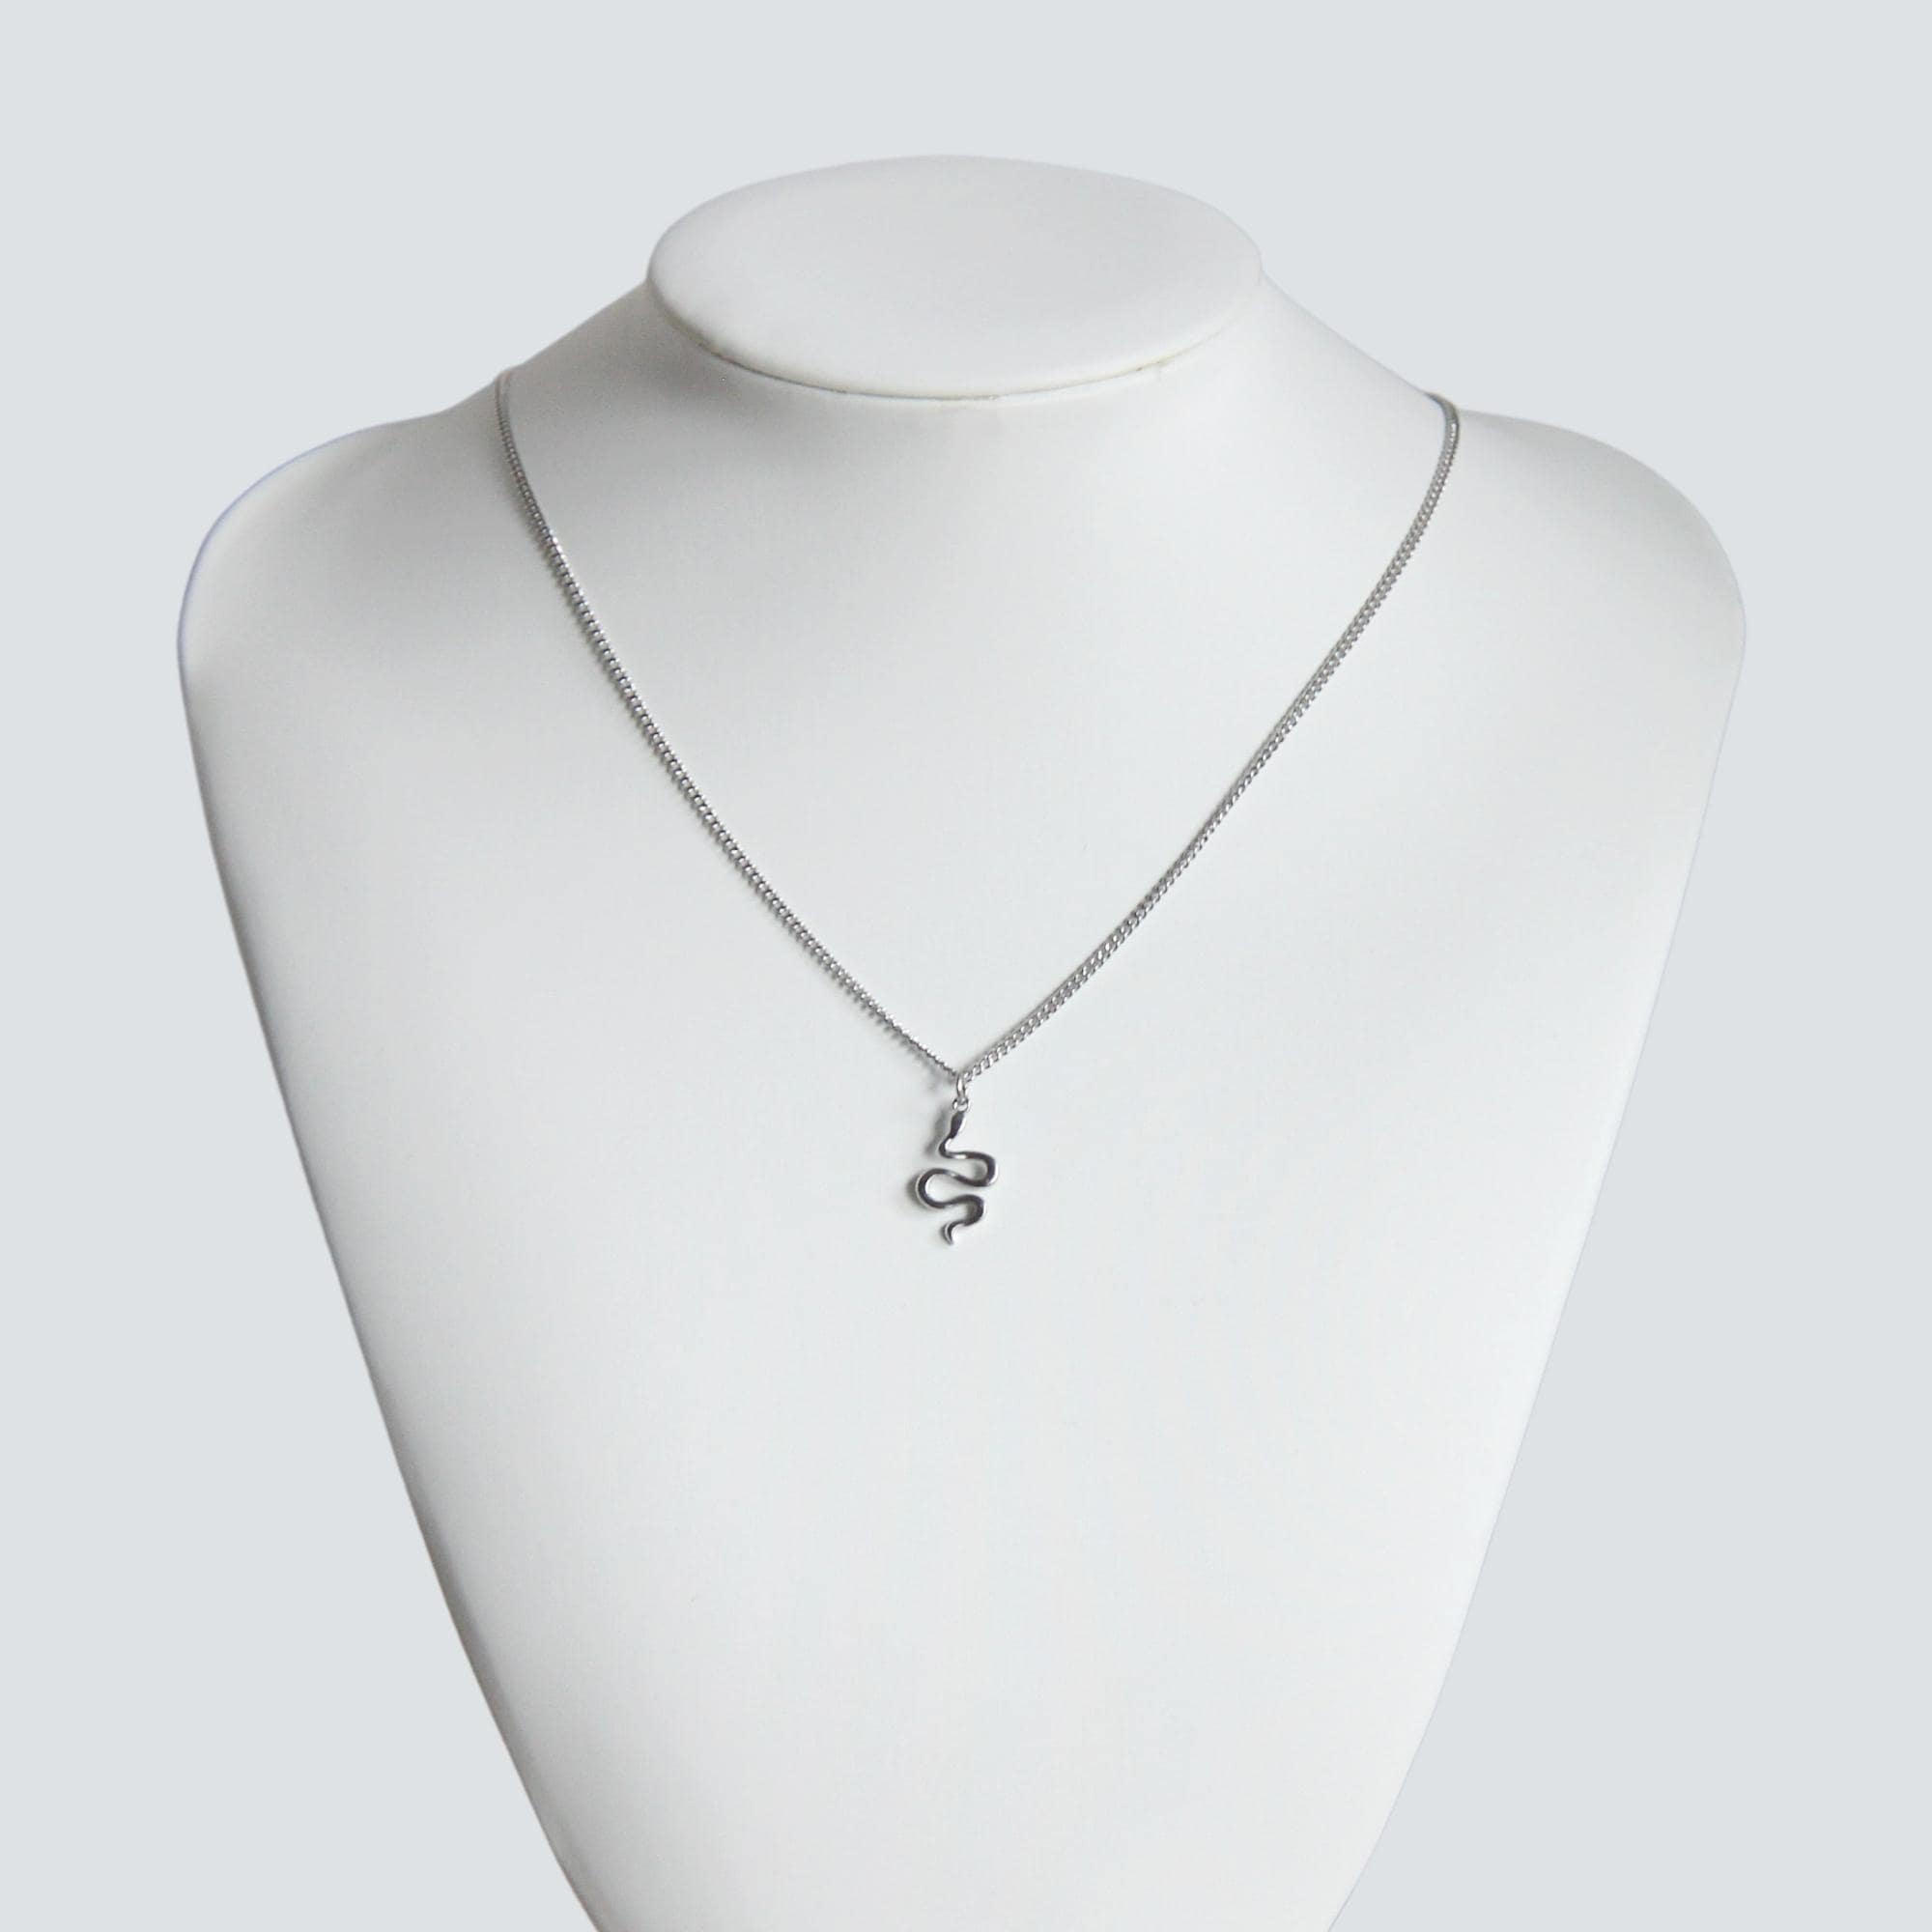 Necklace with snake pendant for men | THOMAS SABO